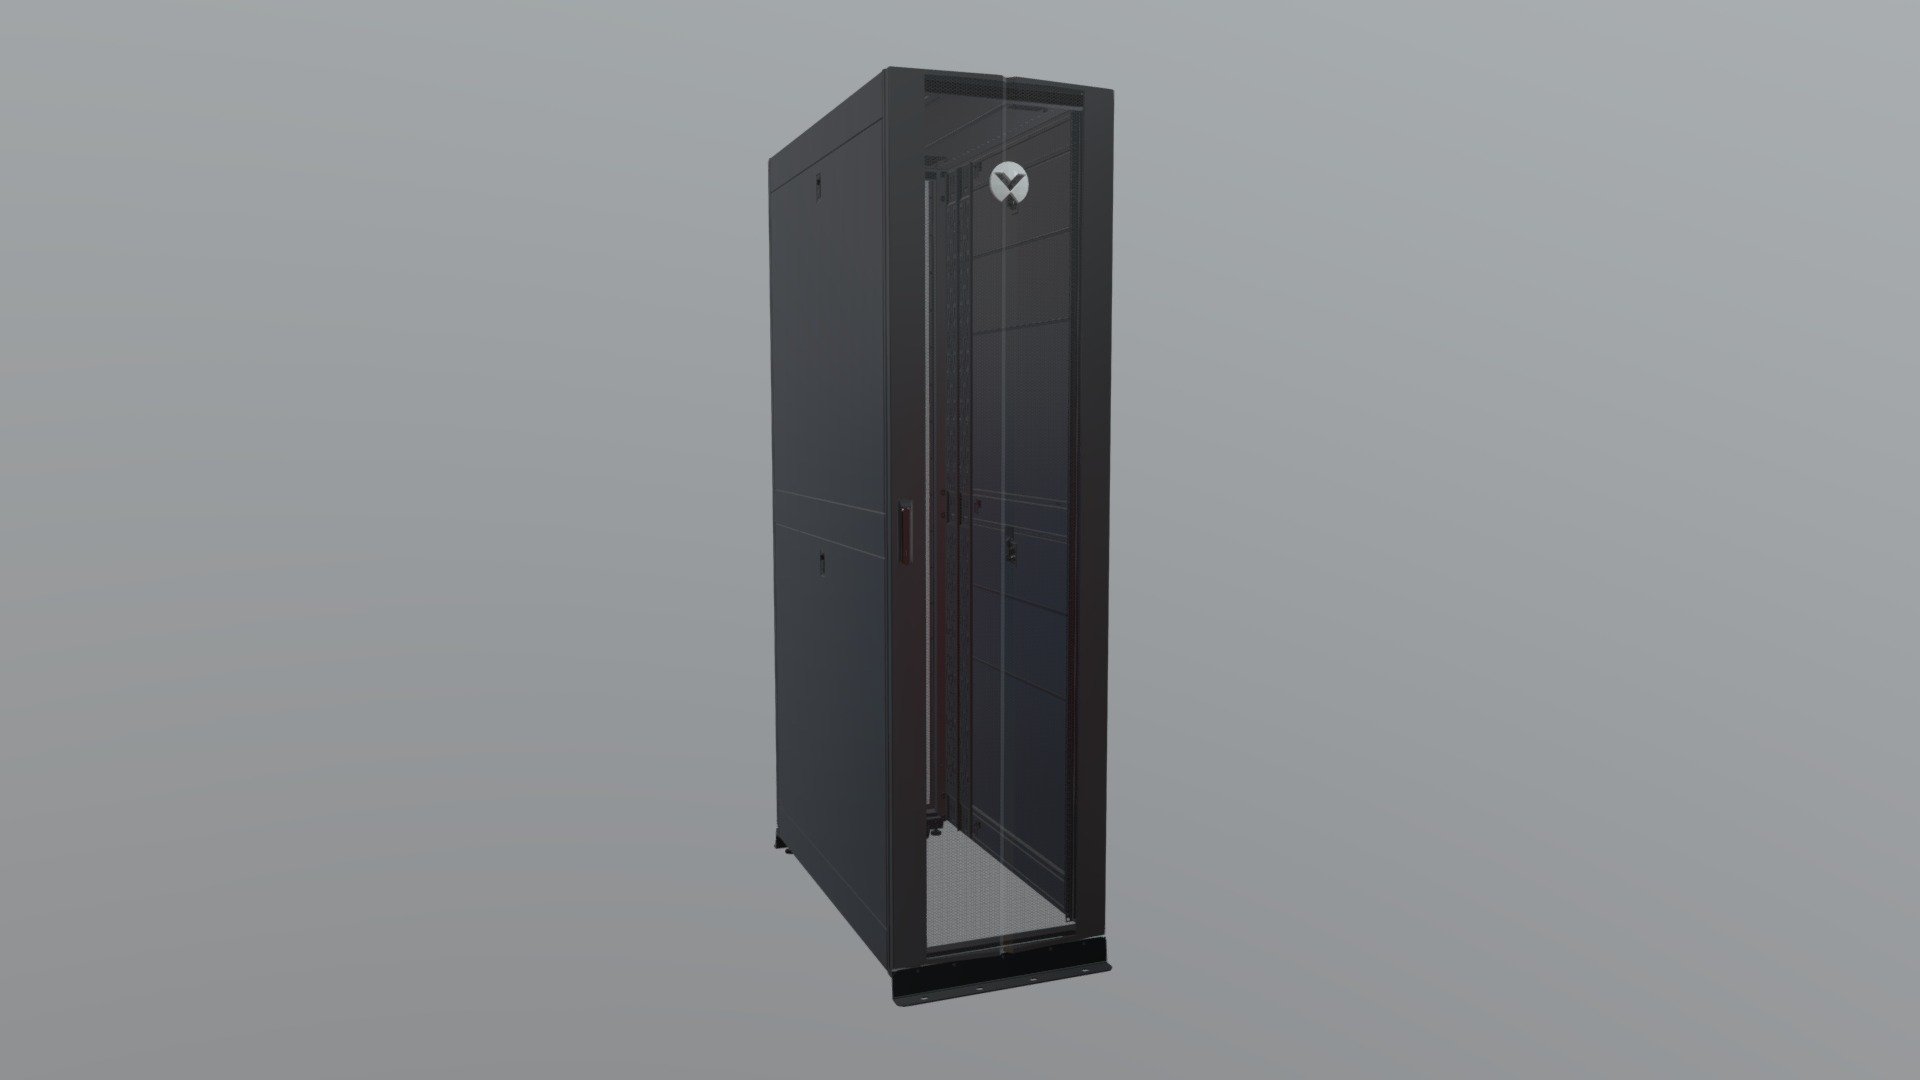 Server rack model for AR / VR use. Private model for specific client. Shown here as an example of what we can do eith CGI Models. We specialize in taking these models to create photo-realistic images and videos of room scenes to Replace Product Photography 3d model